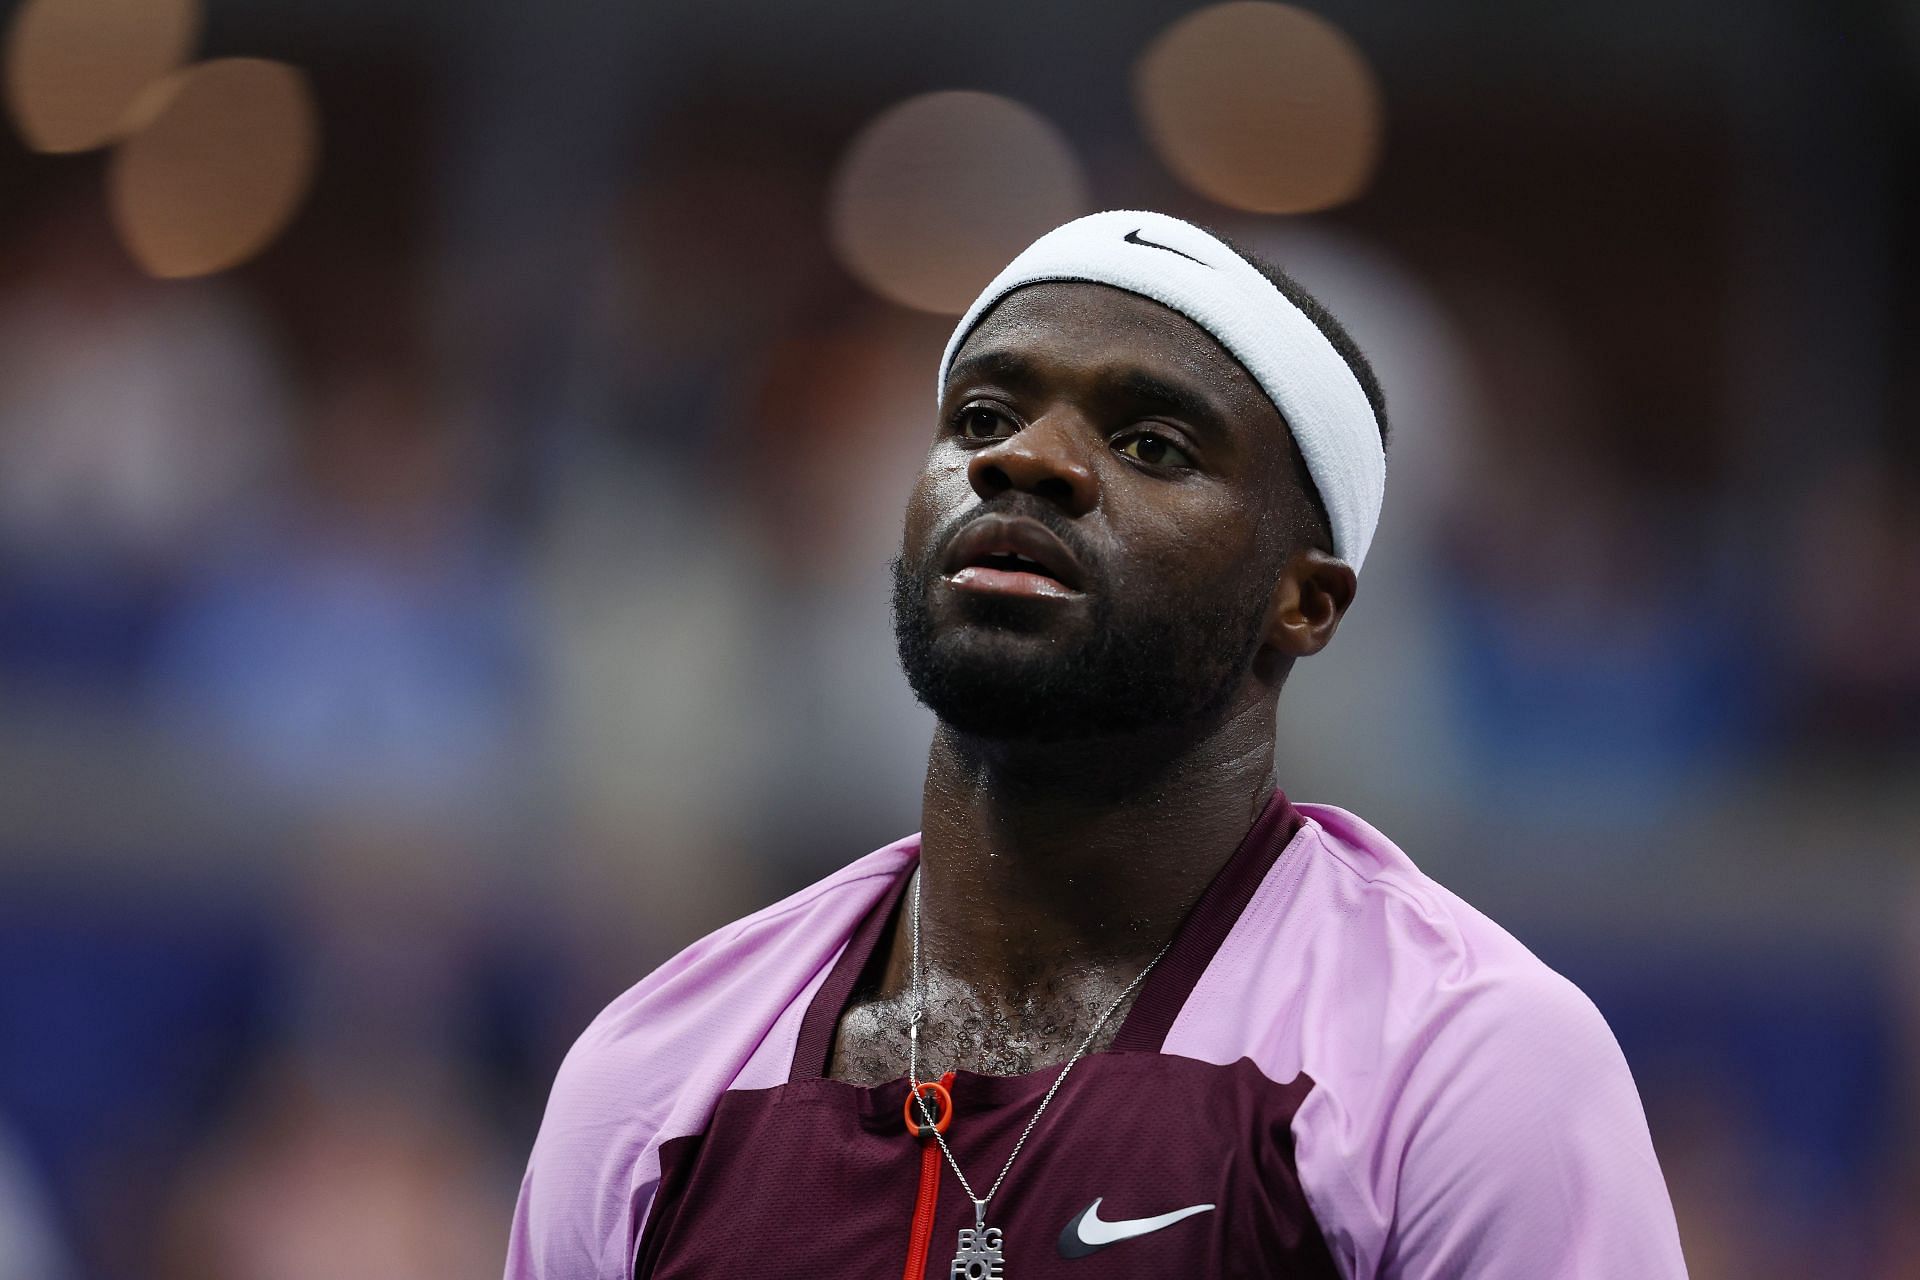 Frances Tiafoe takes on Andrey Rublev in the quarterfinals of the 2022 US Open